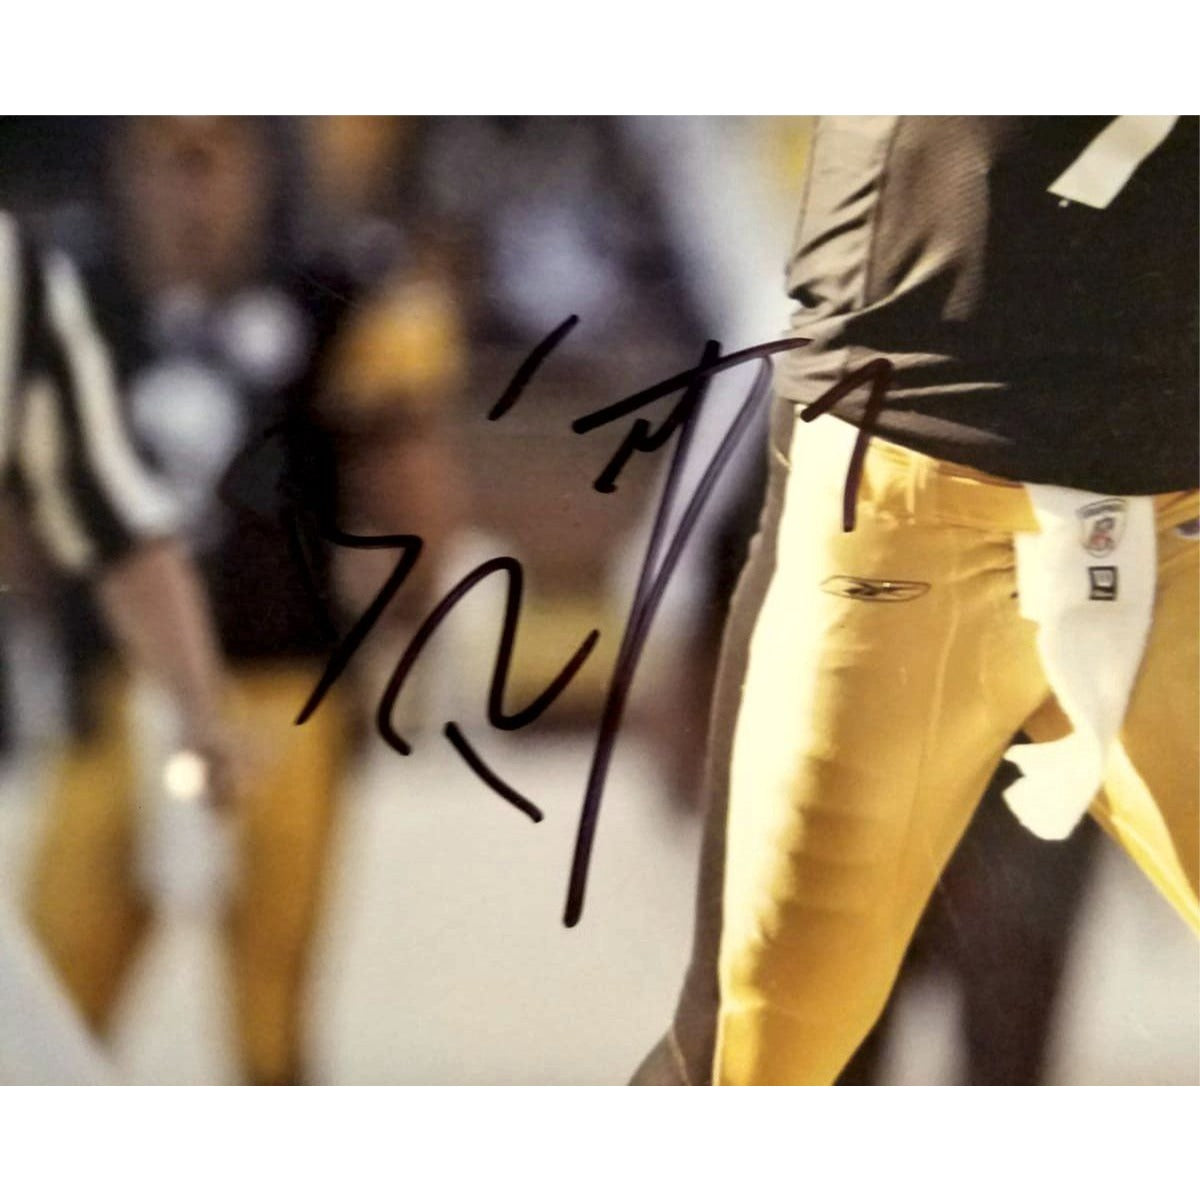 Ben Roethlisberger Pittsburgh Steelers 8x10 photo sign with proof